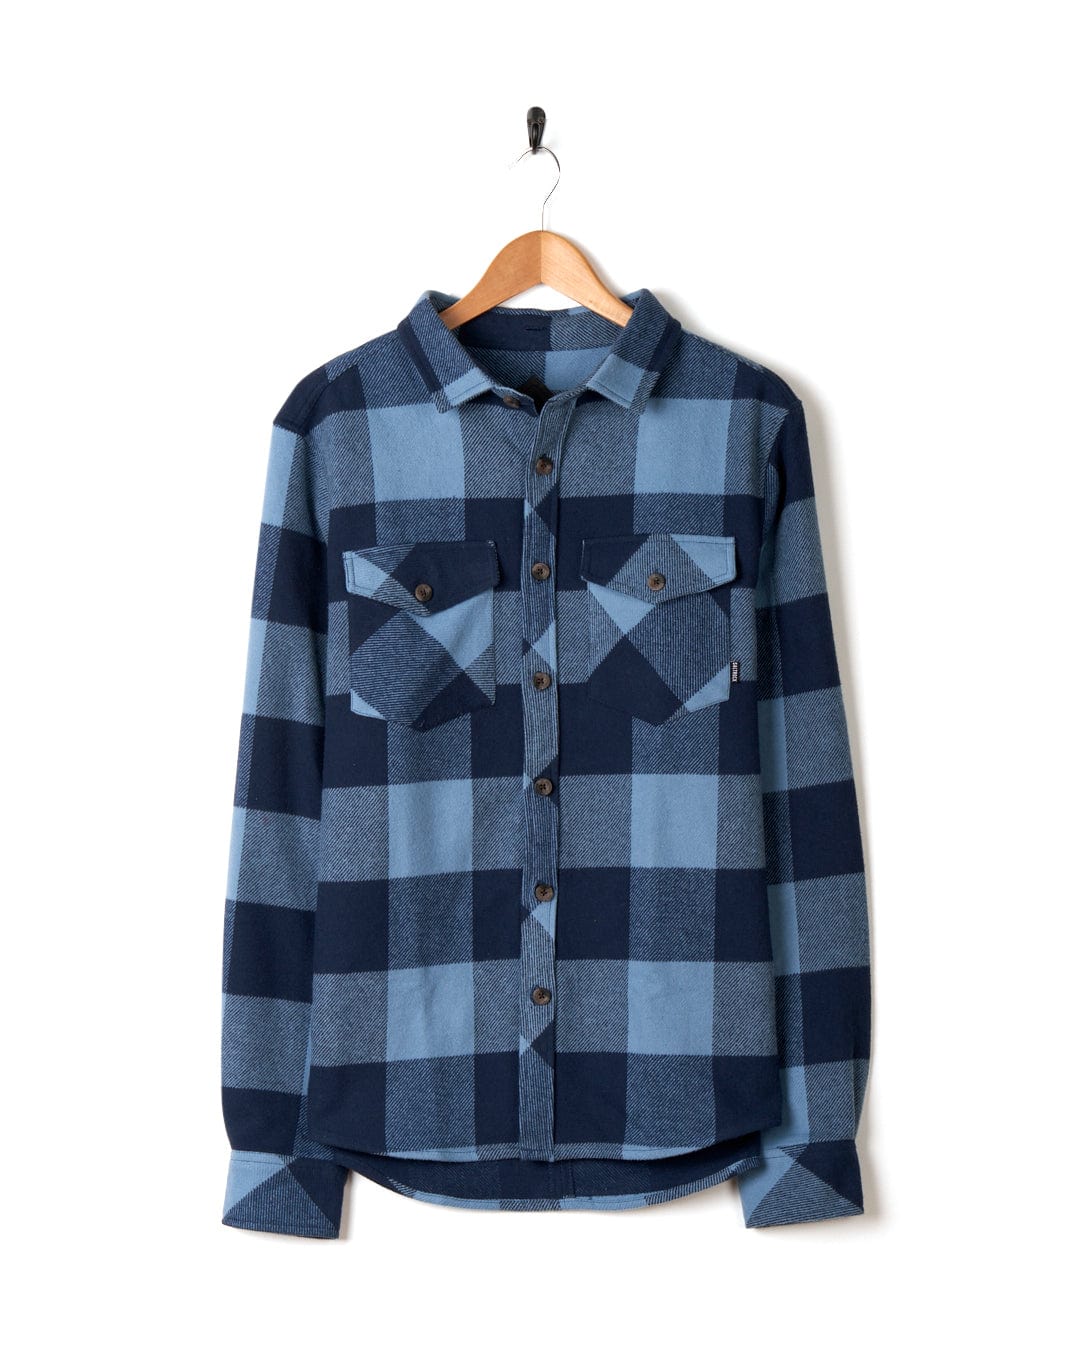 Beale - Mens Hooded Long Sleeve Shirt in Blue by Saltrock hanging on a hanger against a white background.